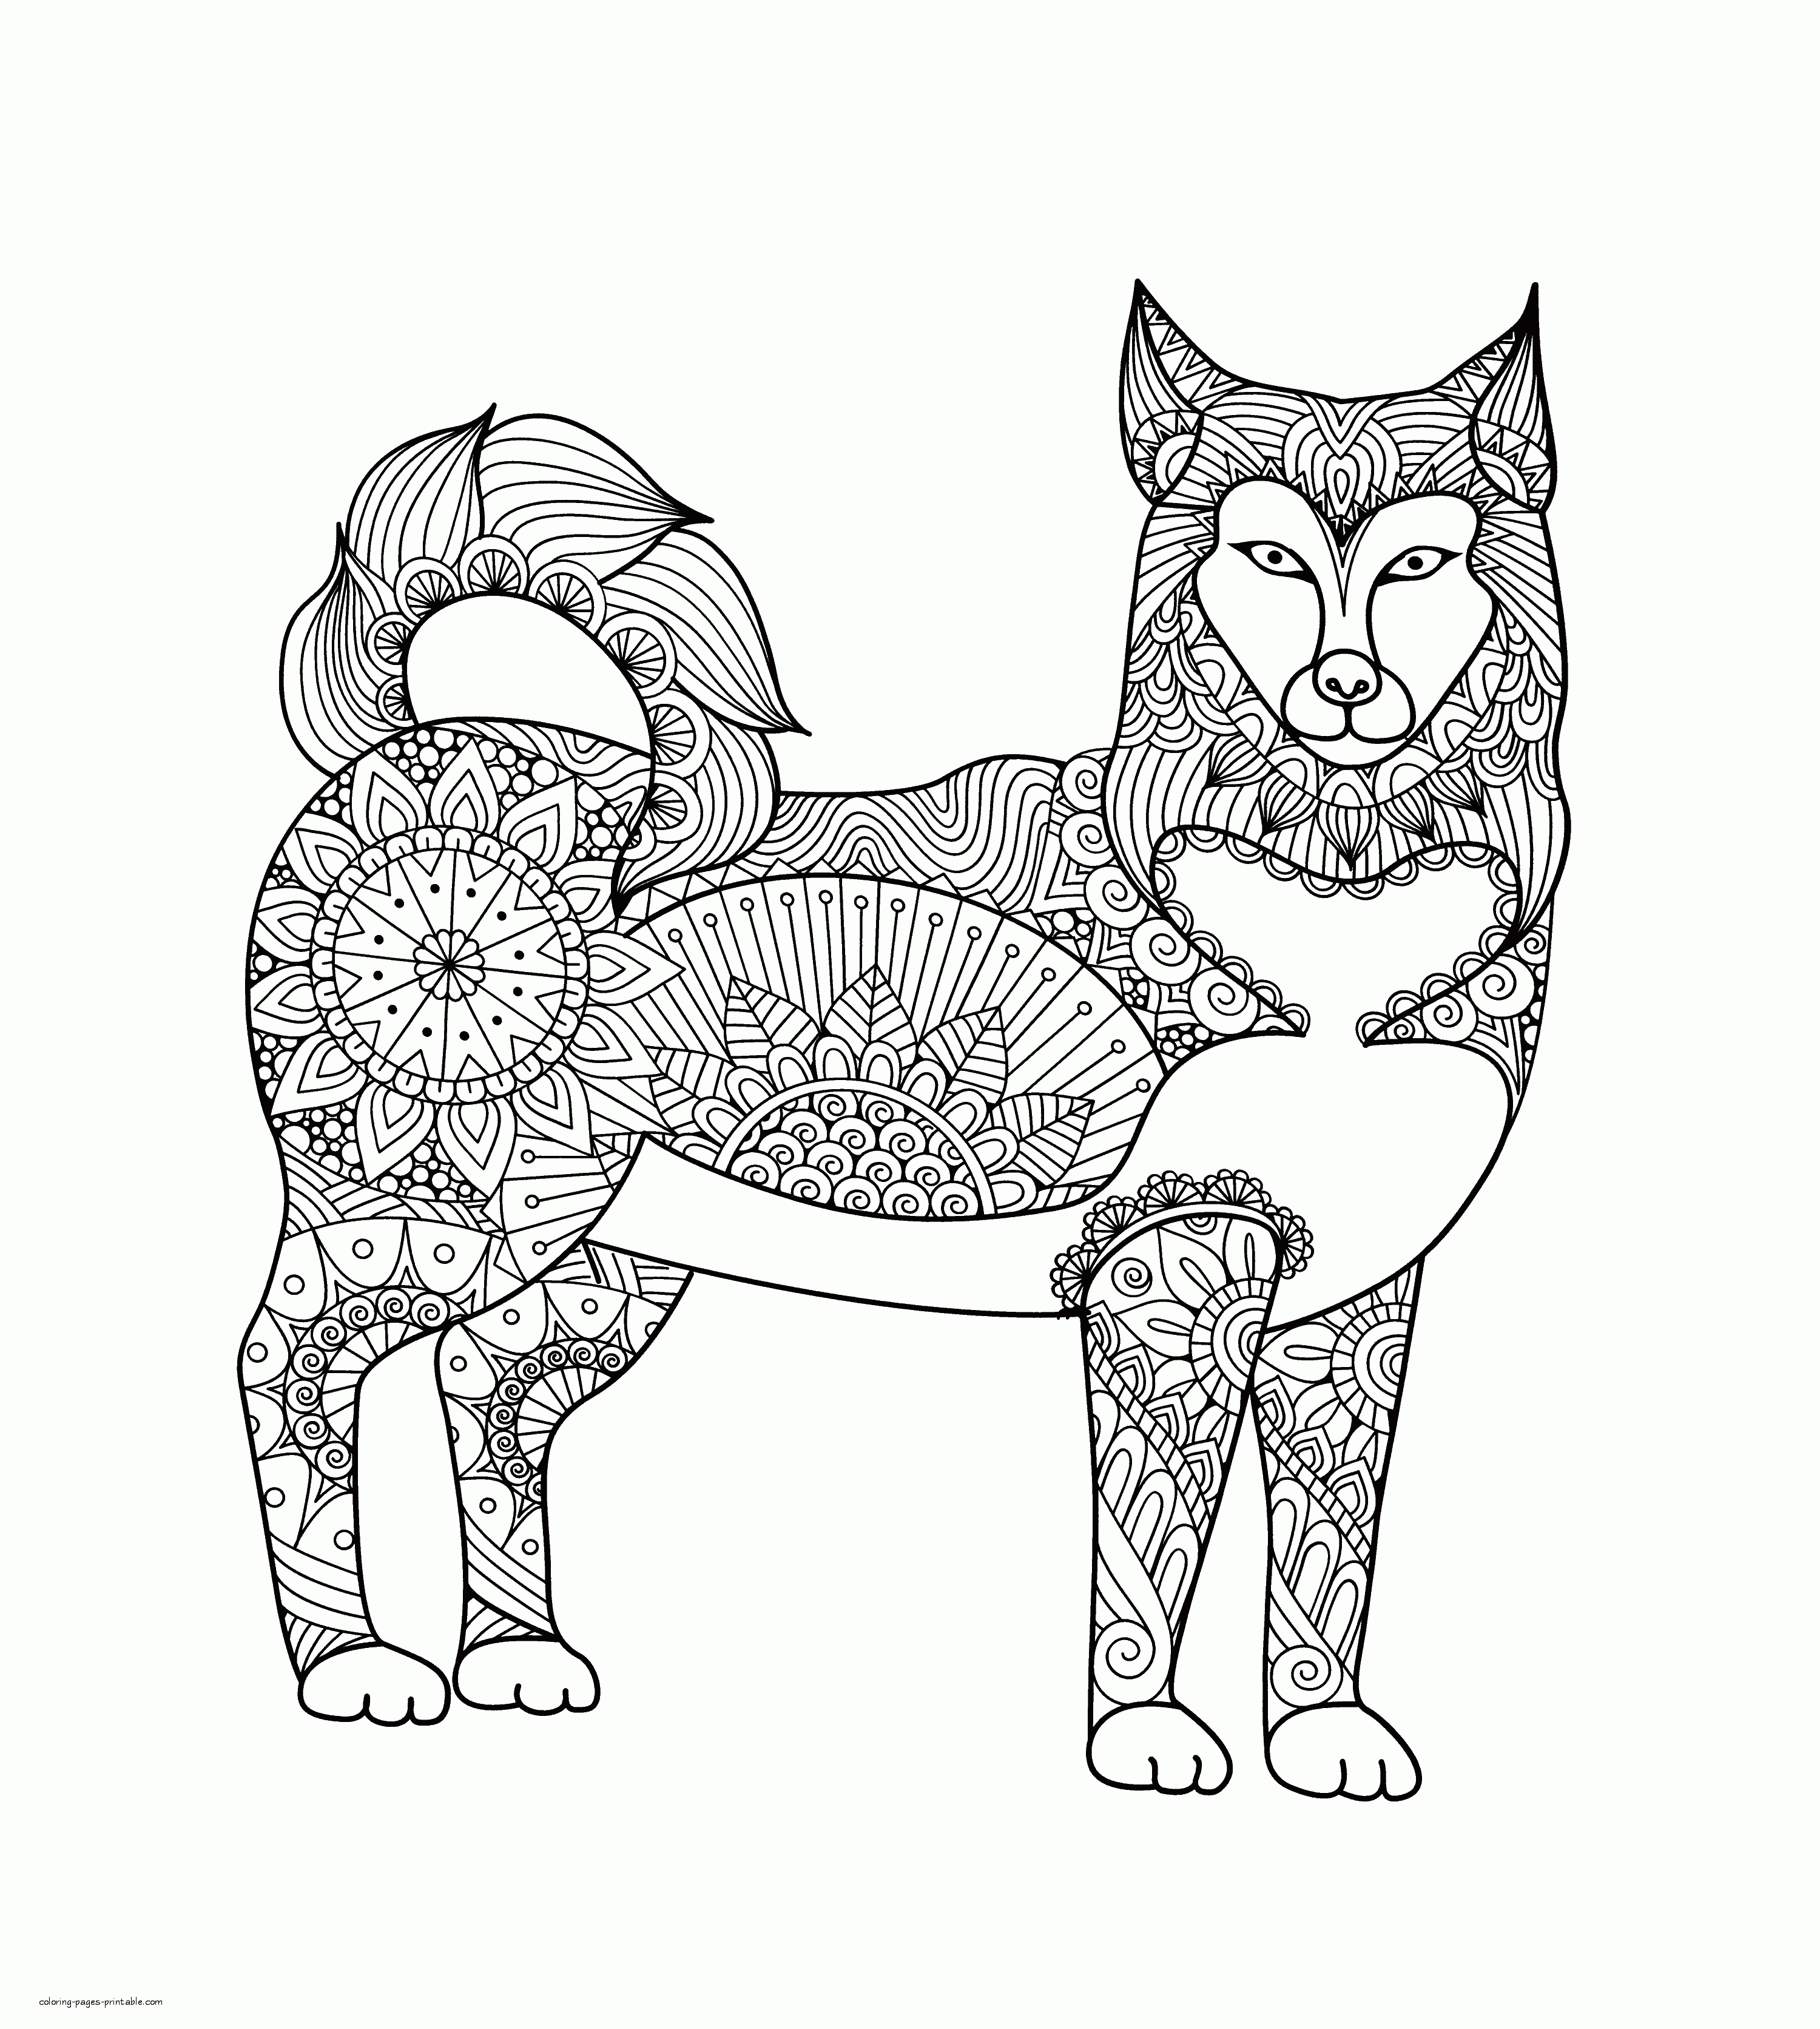 Dog Lover Adult Coloring Book. Free Printable Pics